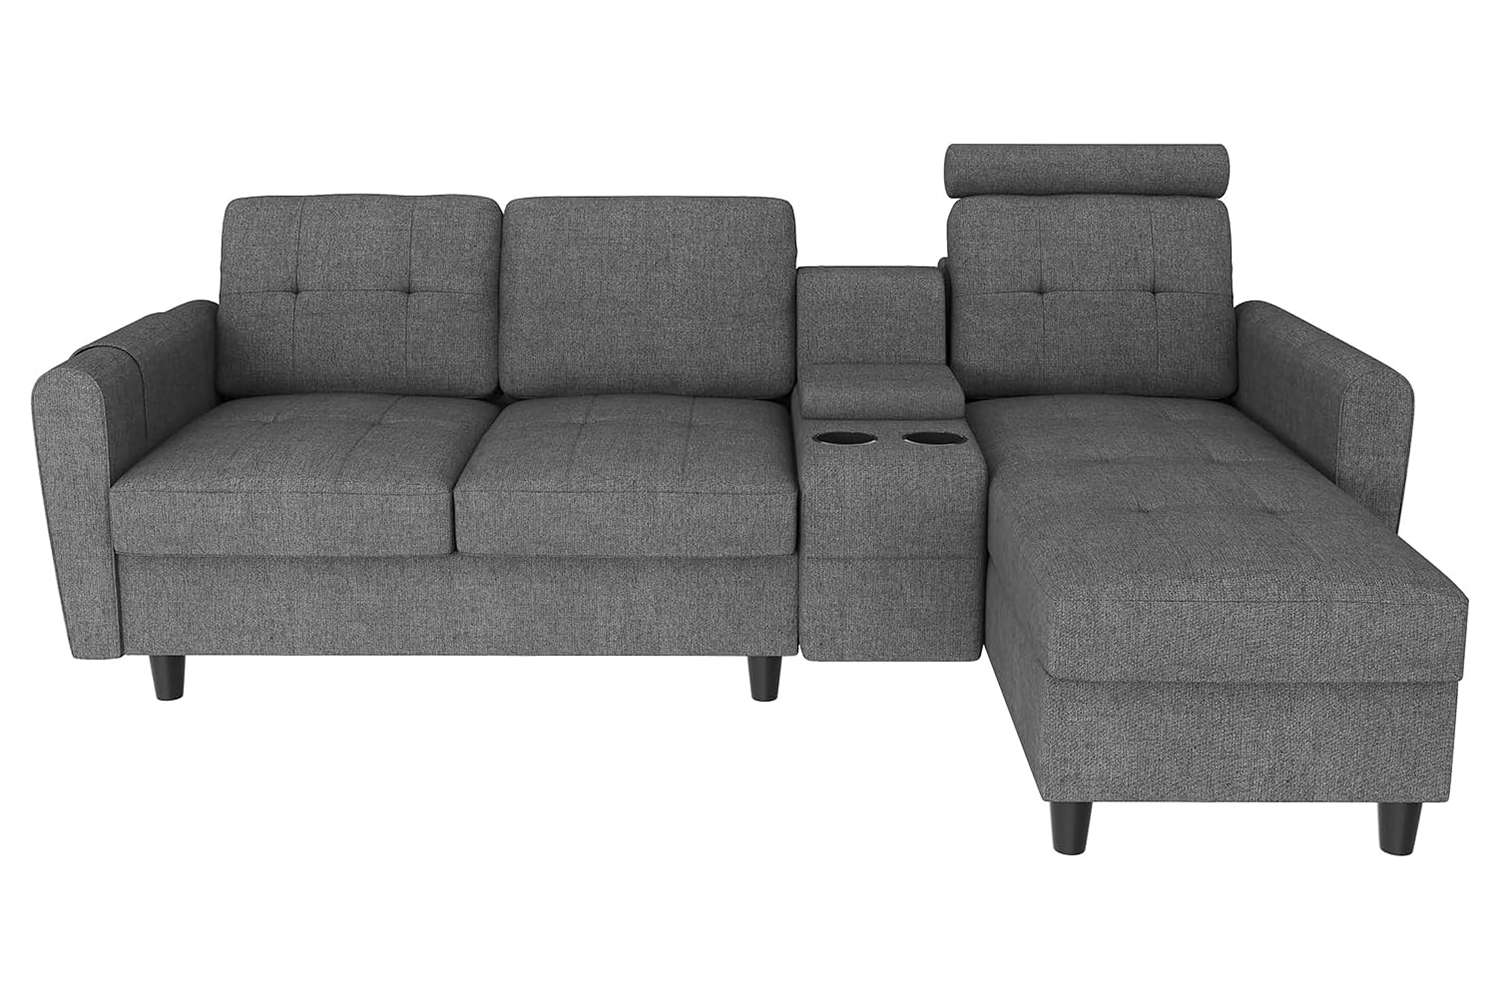 HONBAY Convertible Sectional Couch